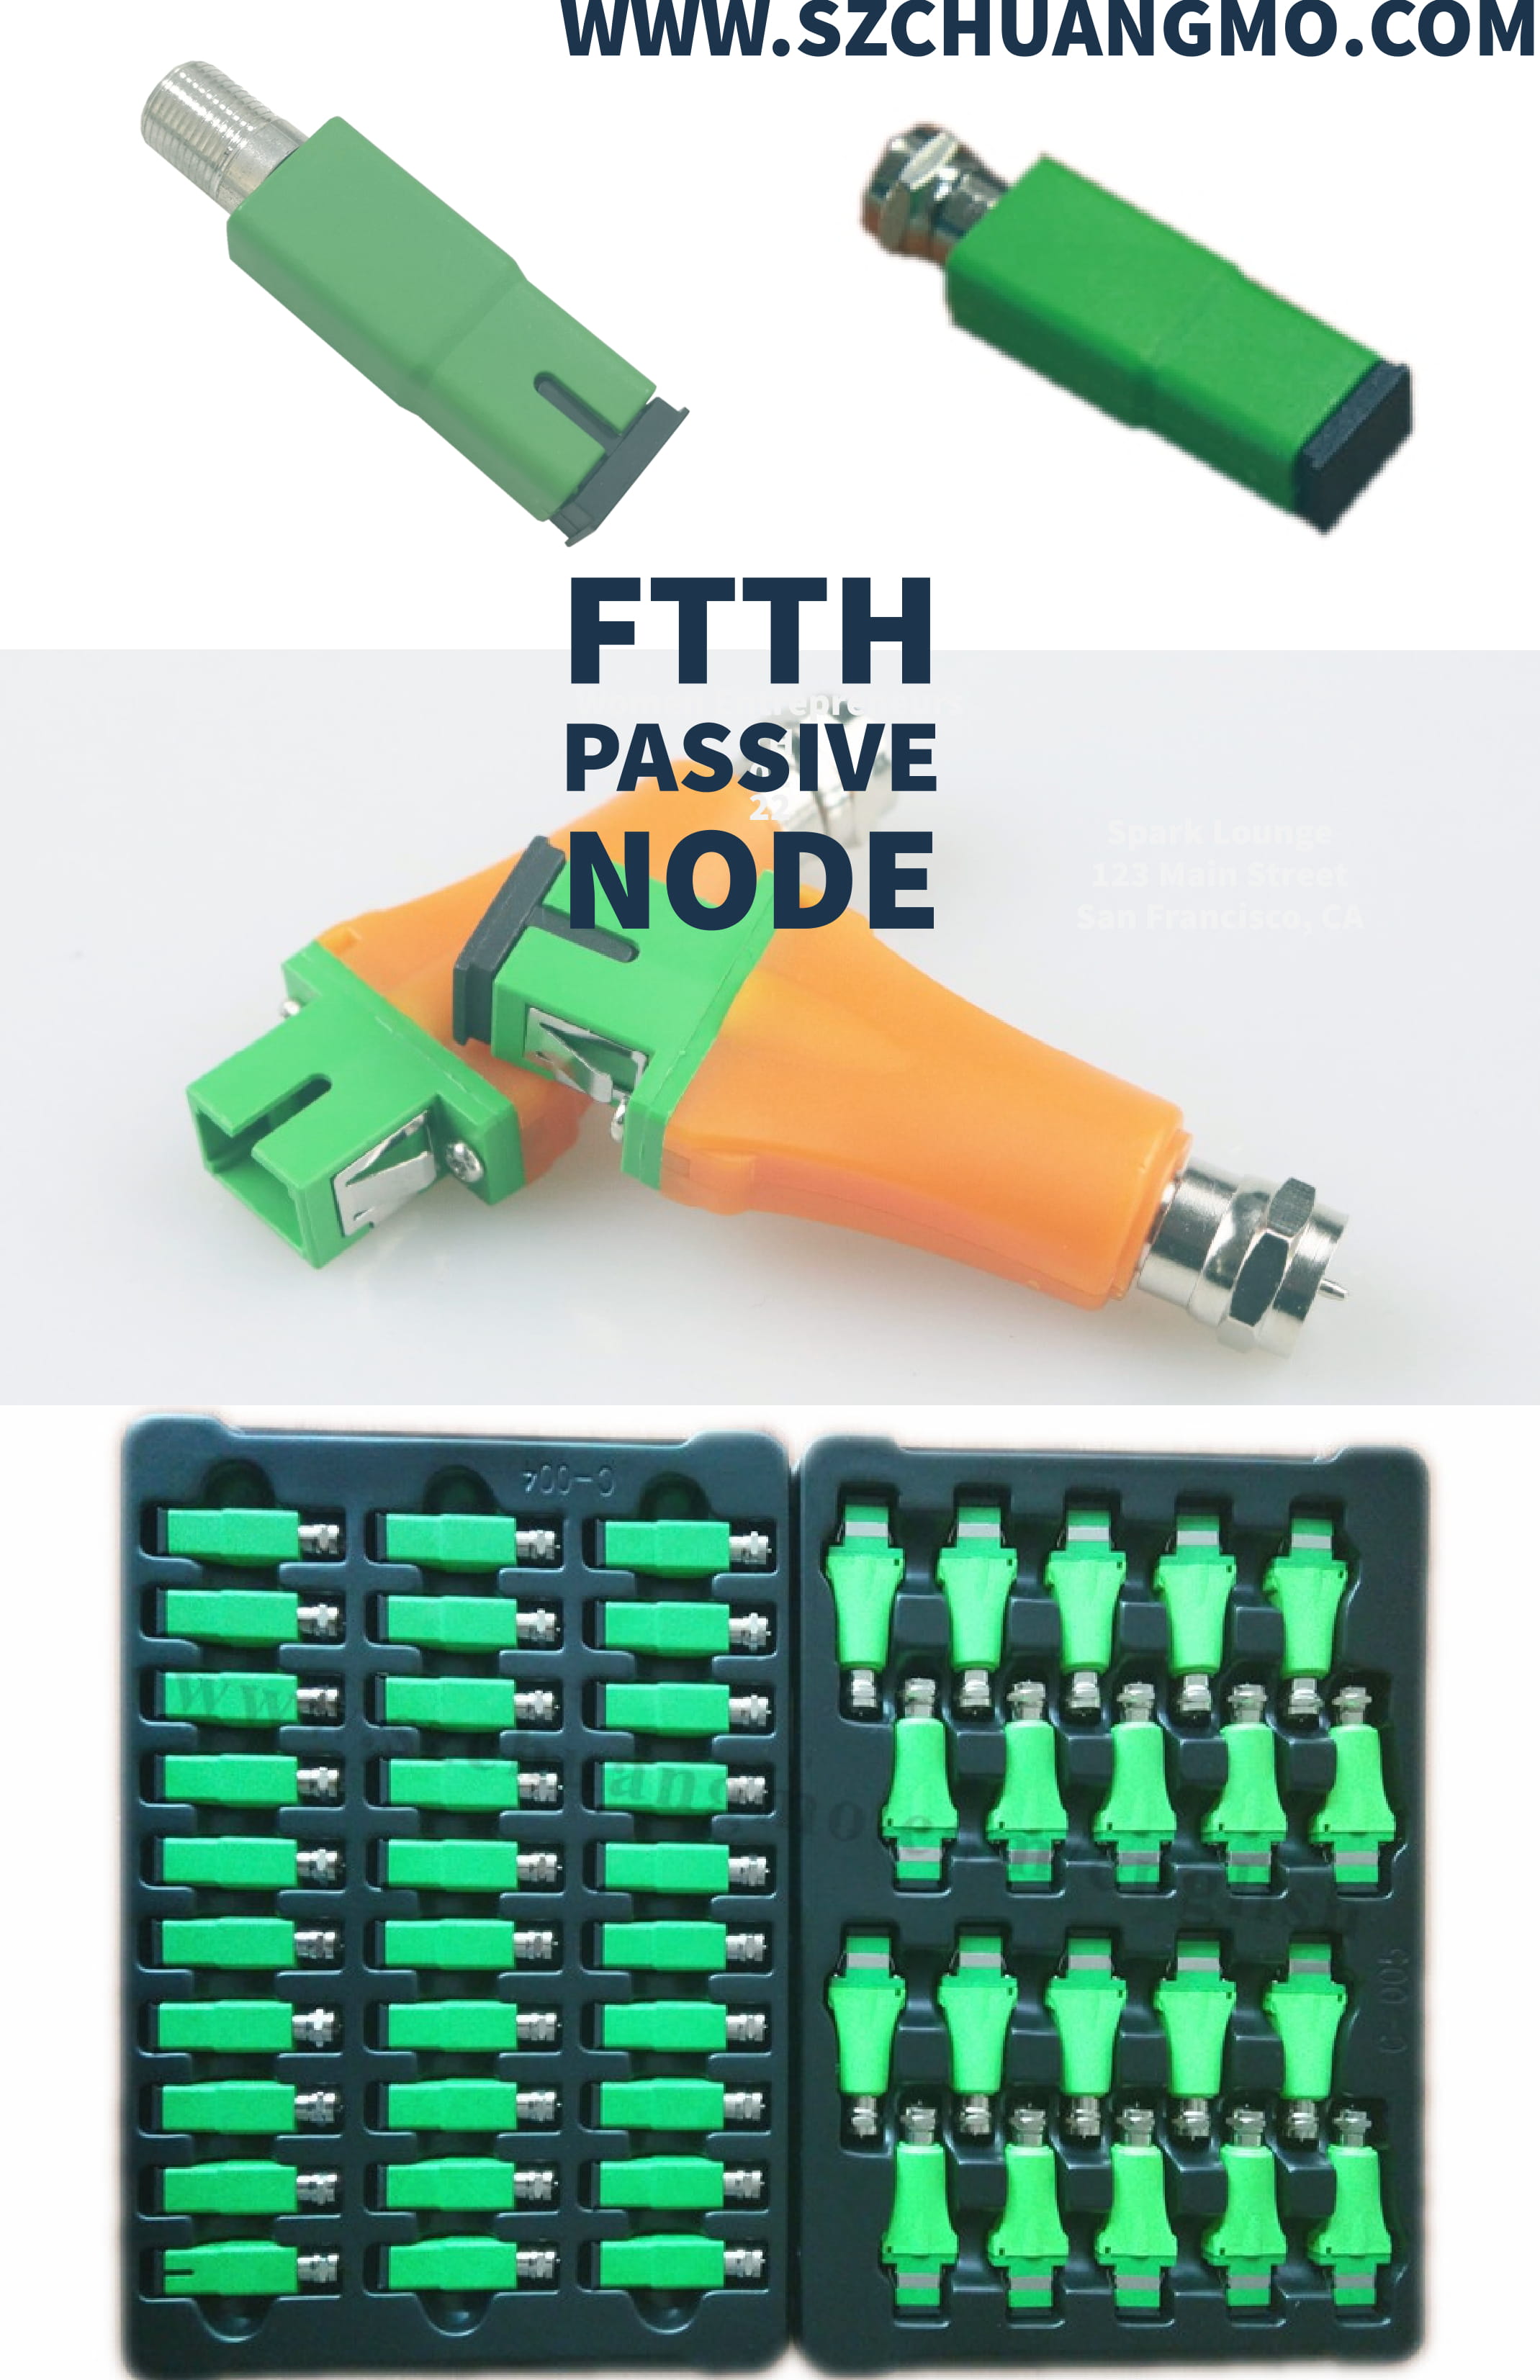 How to select the correct FTTH node for your project?